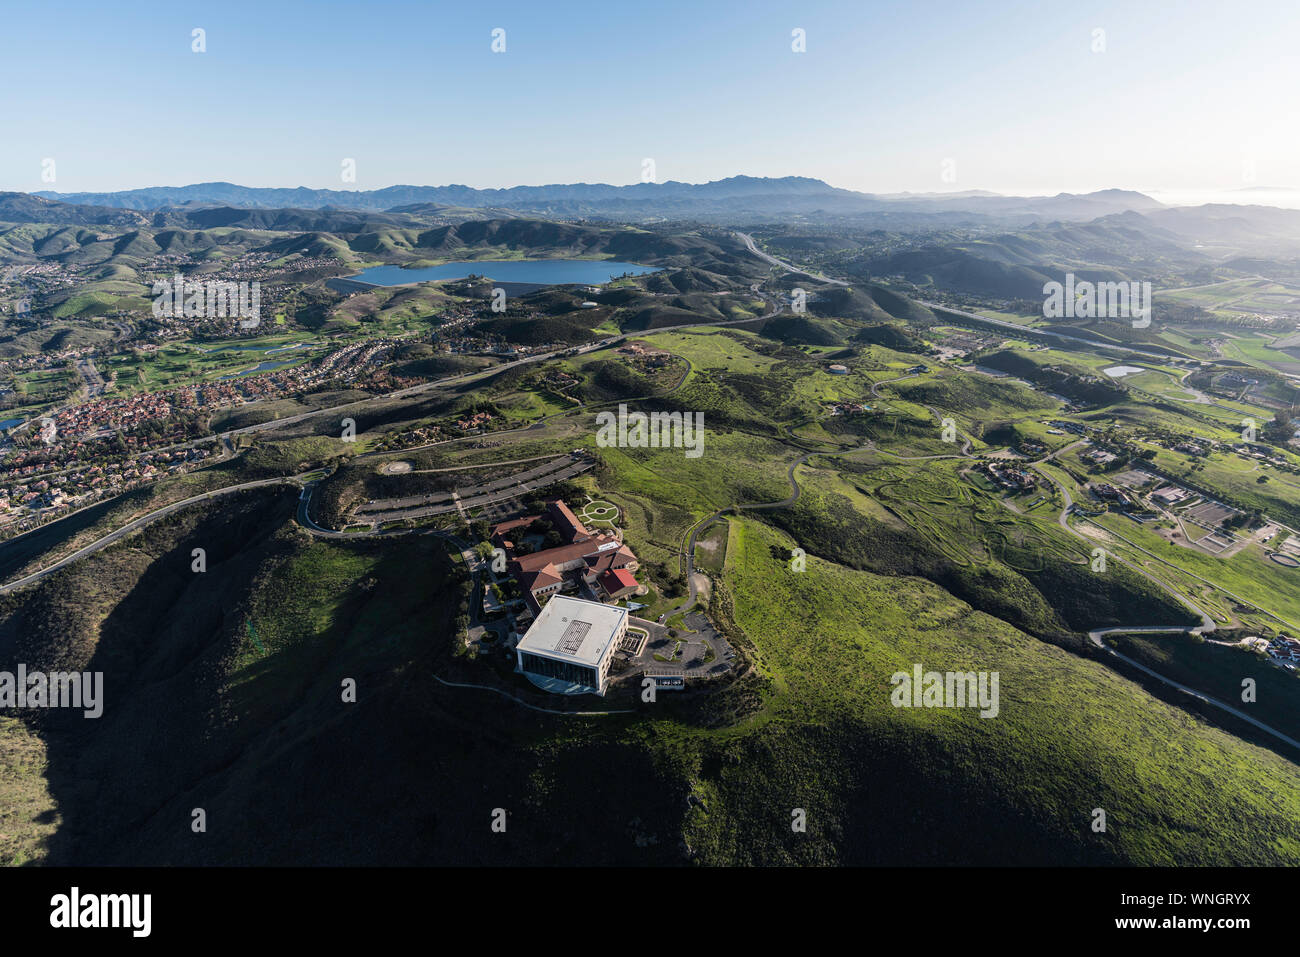 Simi Valley, California, USA - March 26, 2018:  Aerial view of Ronald Reagan Presidential Library and Center for Public Affairs and suburban valleys i Stock Photo